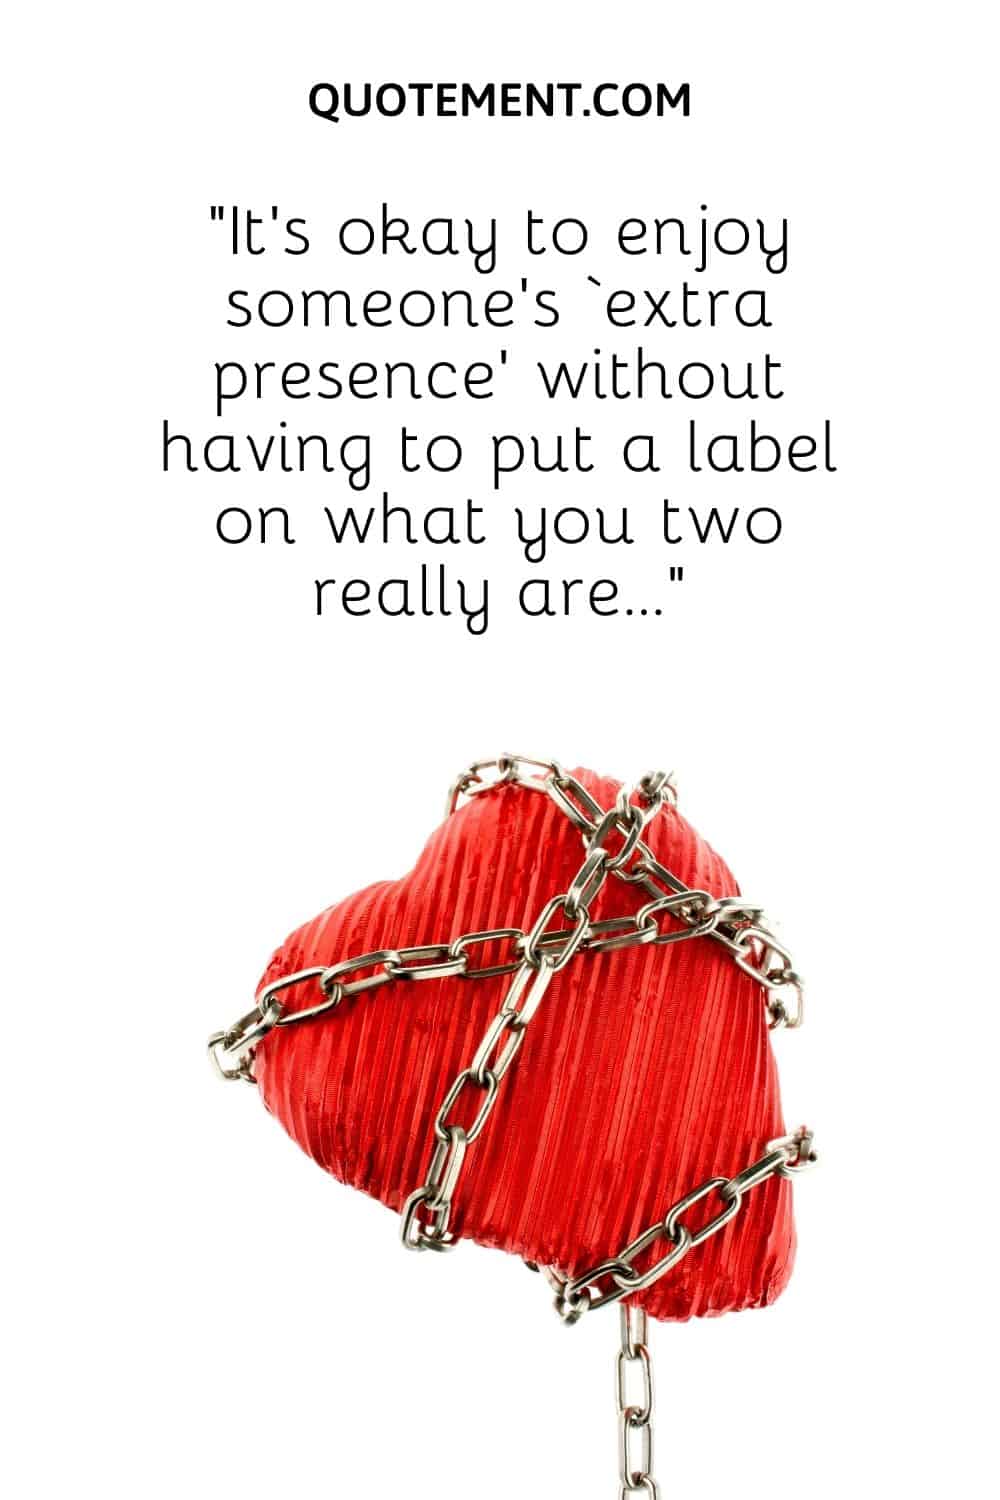 “It’s okay to enjoy someone’s ‘extra presence’ without having to put a label on what you two really are…”